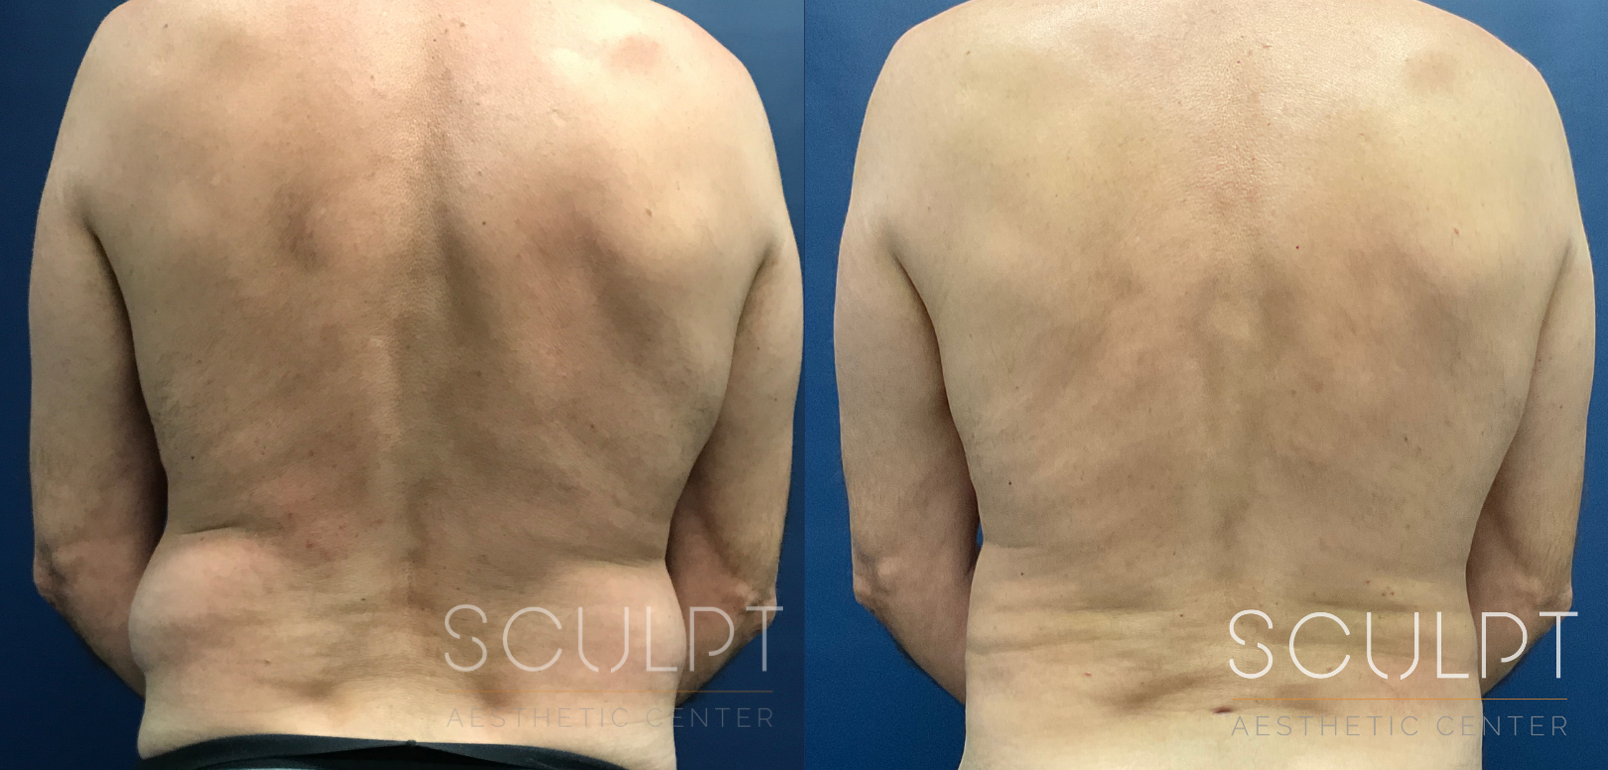 Liposuction to the Abdomen, Flanks, Back Before and After Photo by Sculpt Aesthetic Center in Frisco, TX